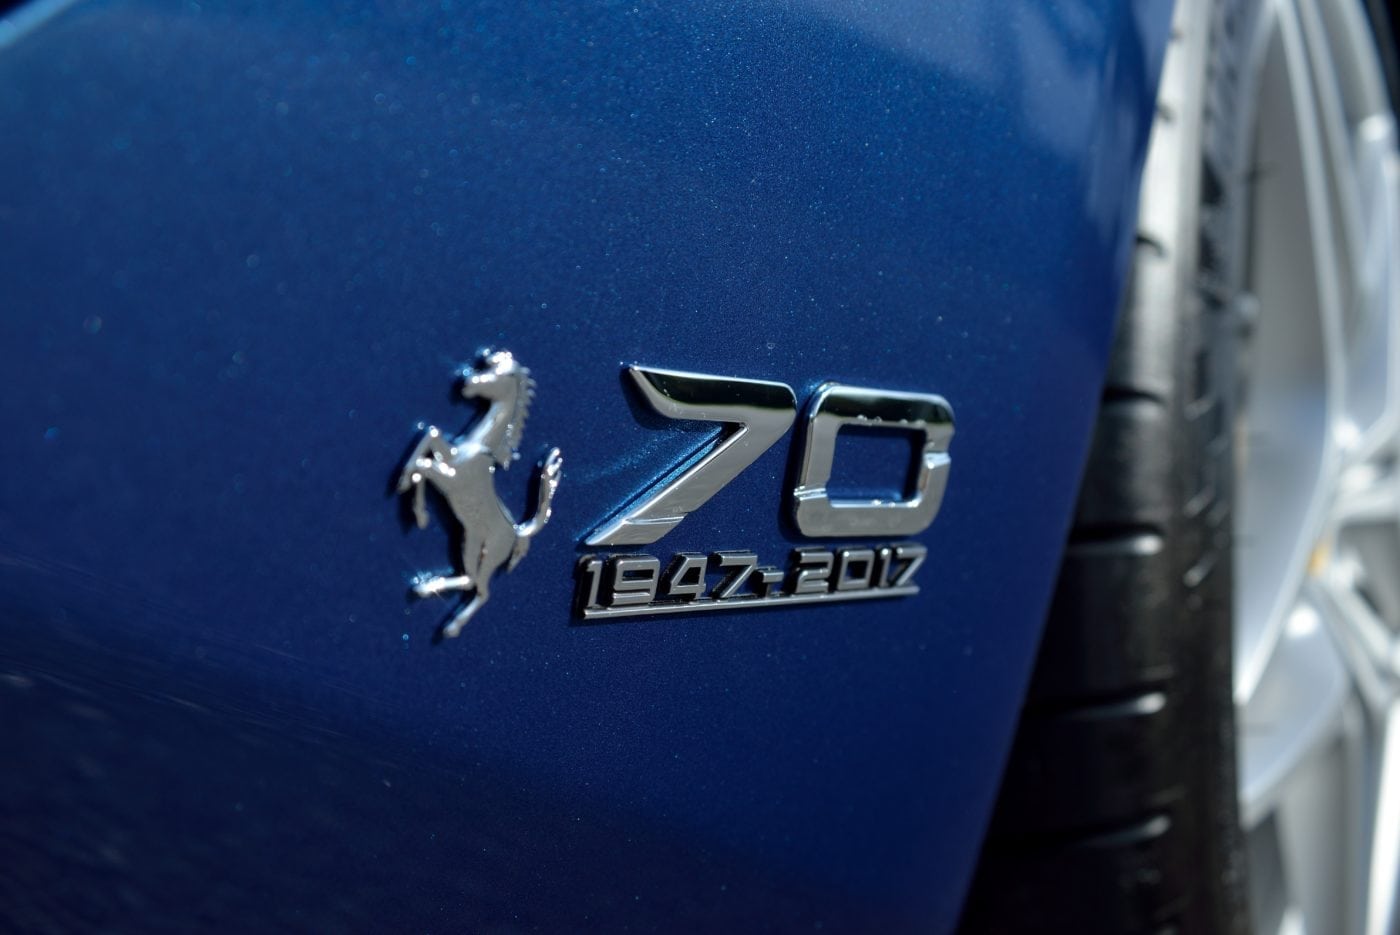 The 70th Anniversary badge is a mark of excellence